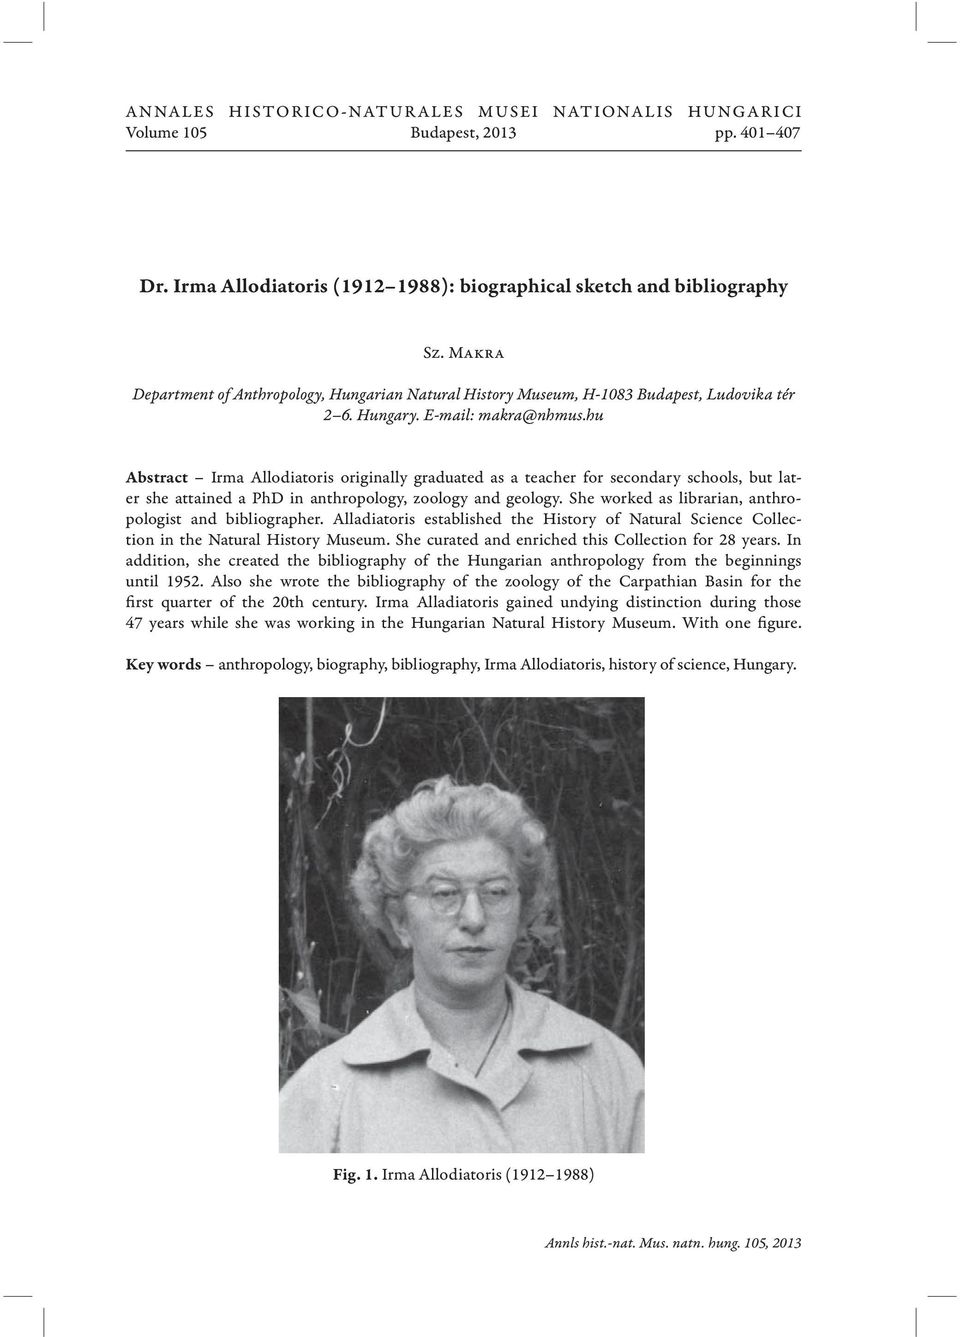 hu Abstract Irma Allodiatoris originally graduated as a teacher for secondary schools, but later she attained a PhD in anthropology, zoology and geology.